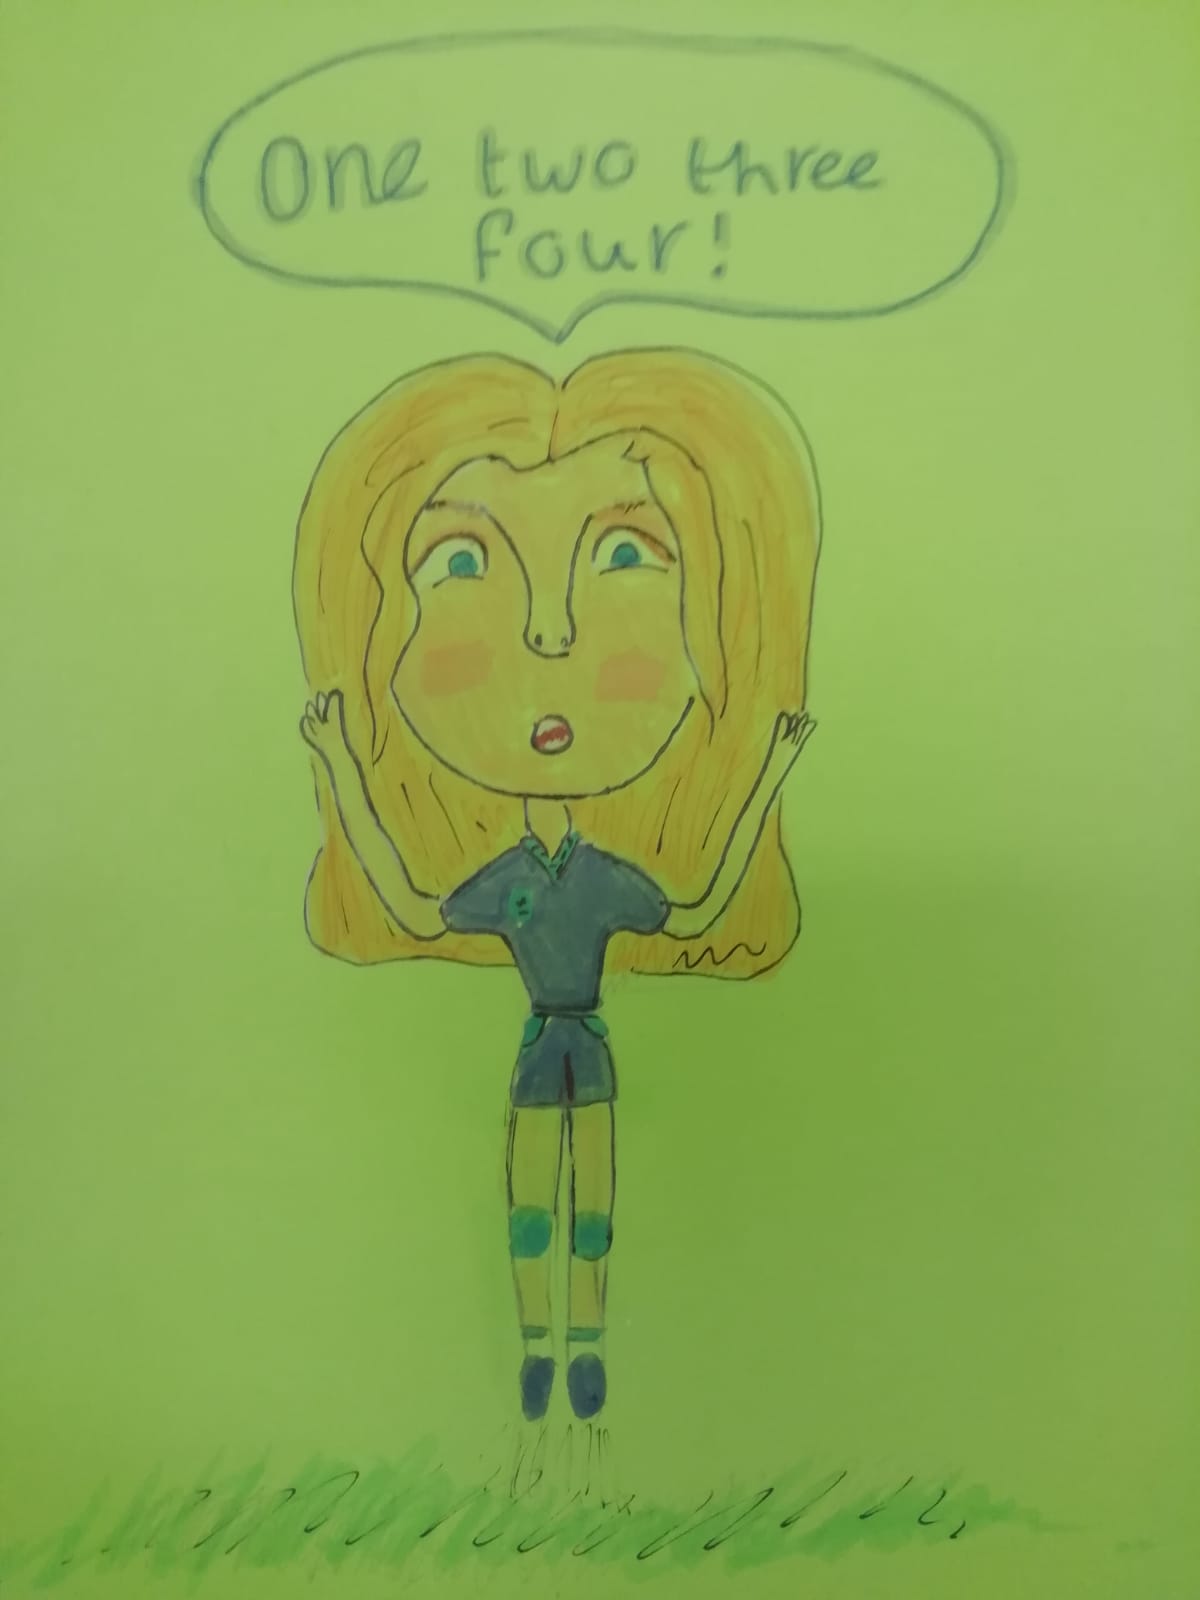 Drawing of a girl with long yellow hair, dressed in football kit and shouting 1,2,3,4